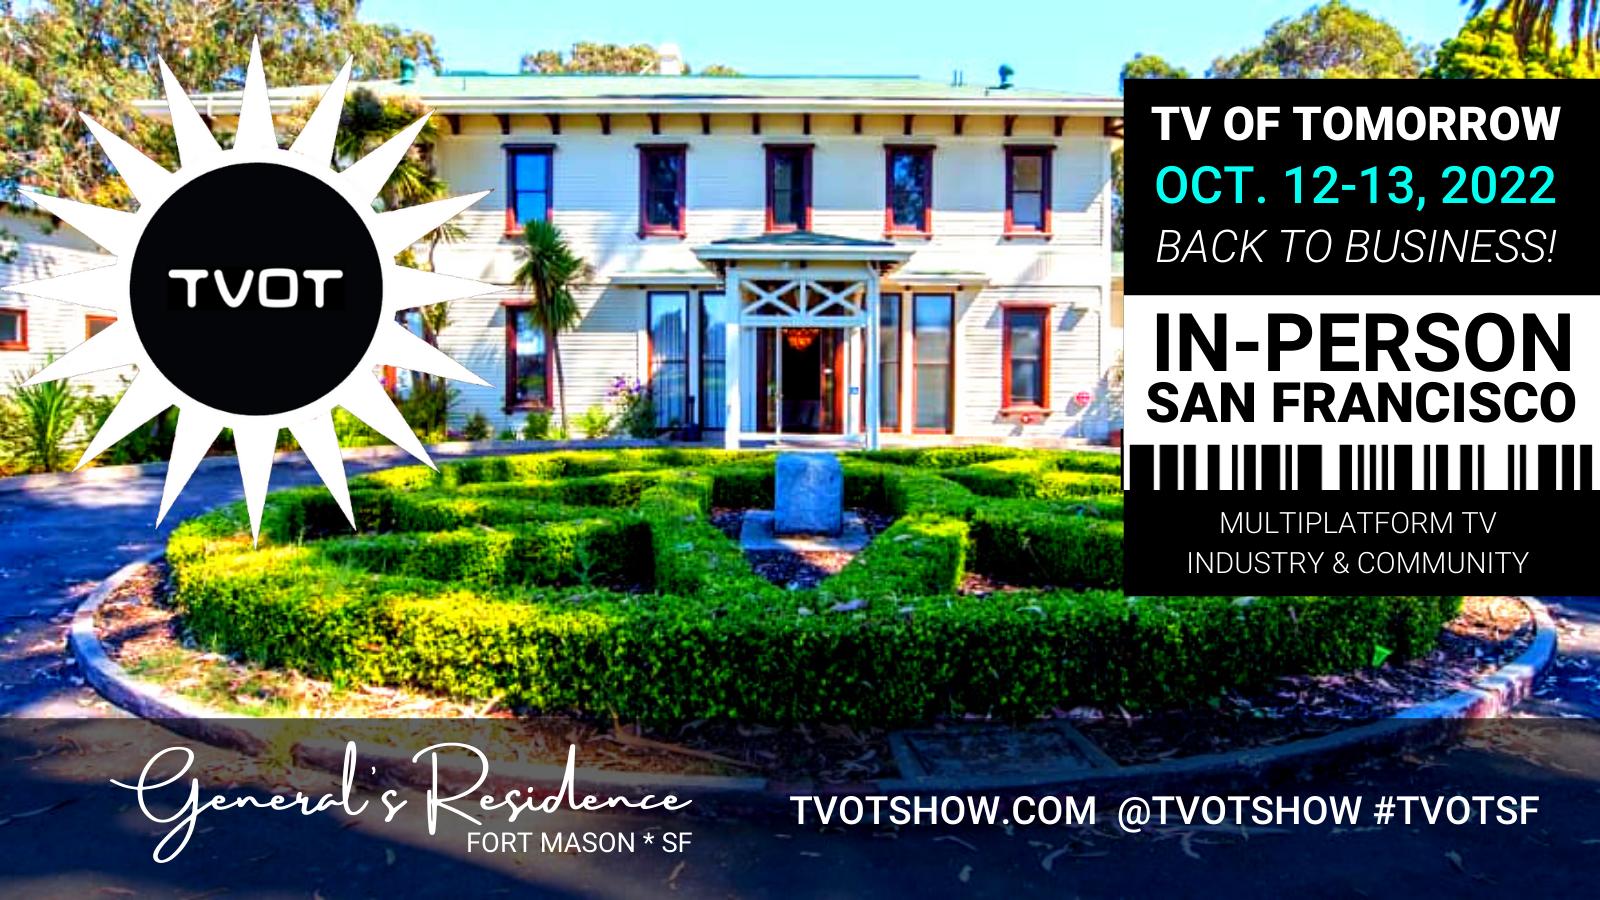 TV of Tomorrow Show (TVOT) SF 2022 to Take Place in Spectacular New Location, October 12th-13th